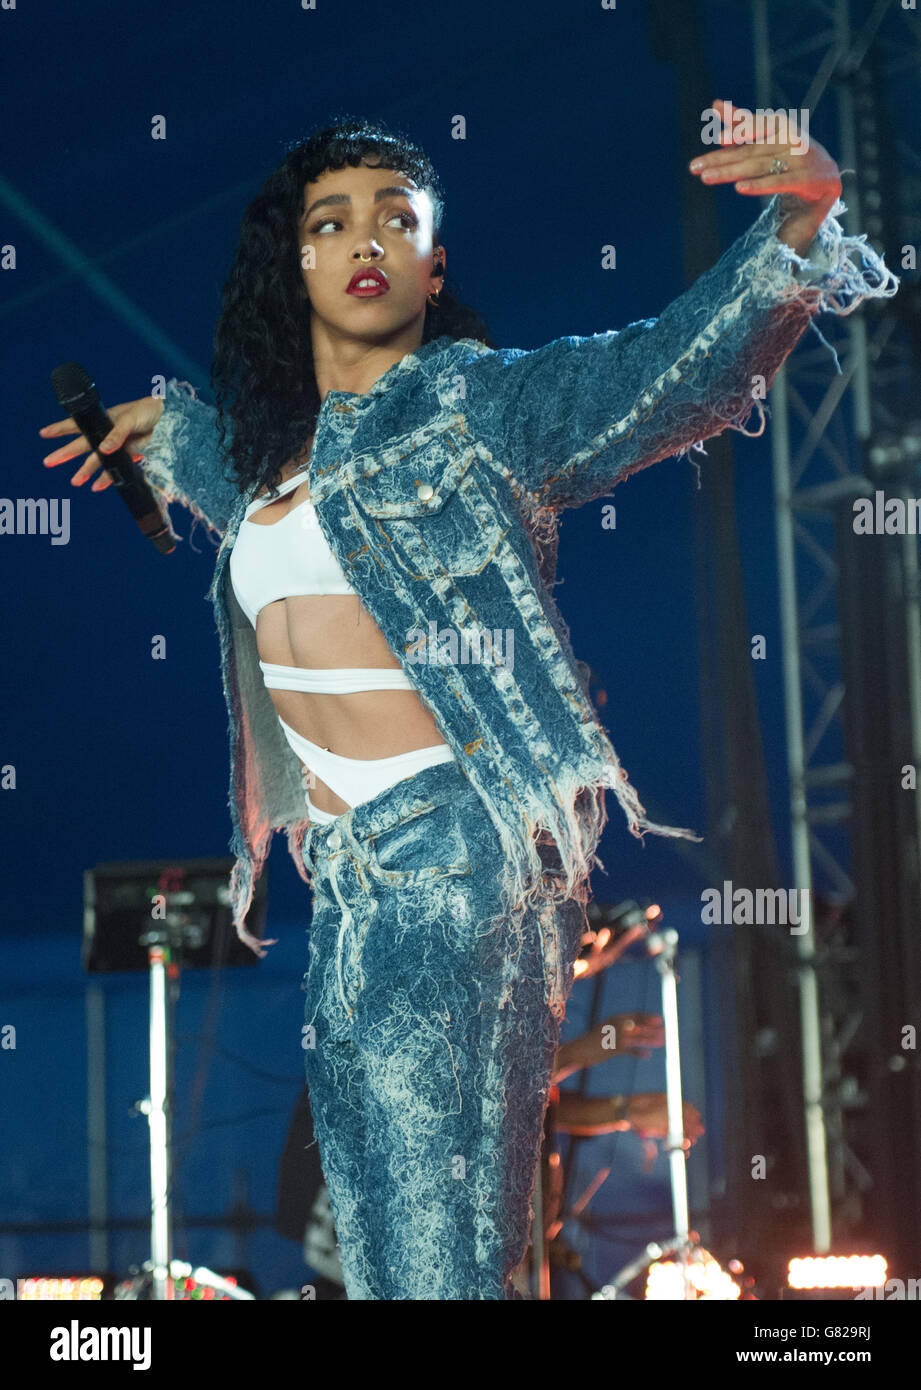 FKA Twigs performing live on day 2 of Parklife festival on June 07, 2015 in Heaton Park Manchester, United Kingdom Stock Photo